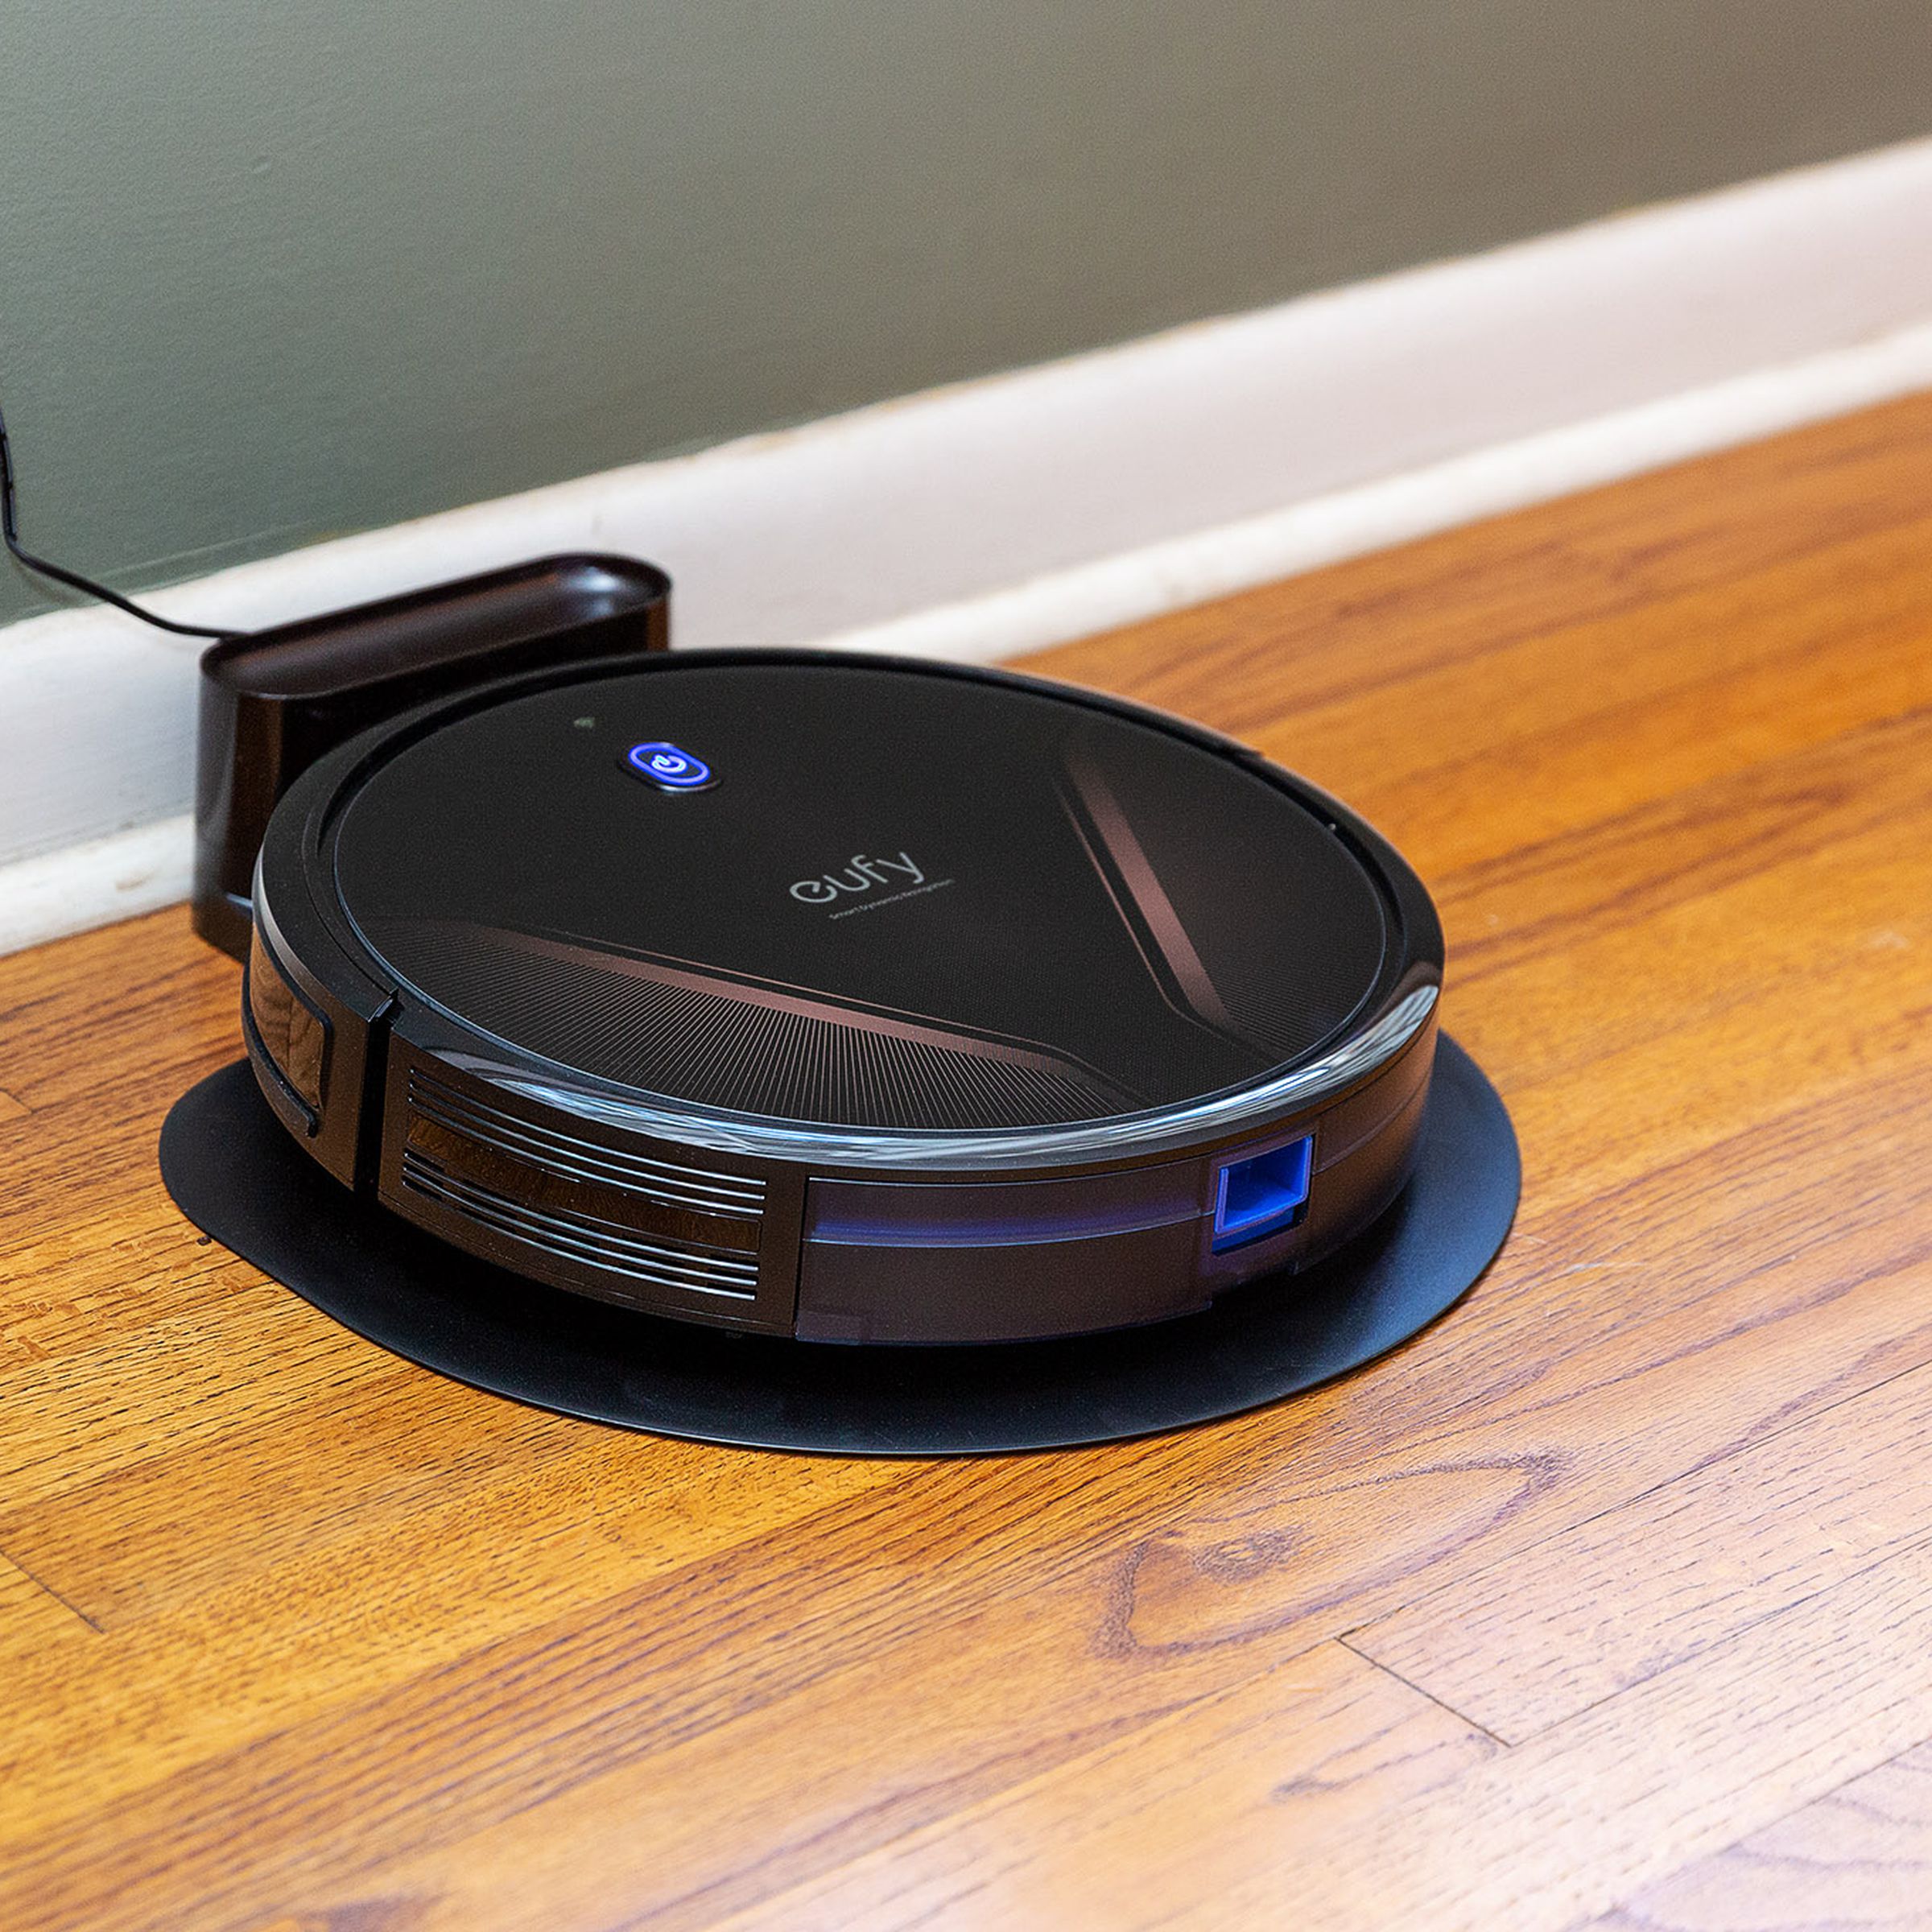 Eufy’s G20 Hybrid plugged into the wall resting on a hardwood floor.